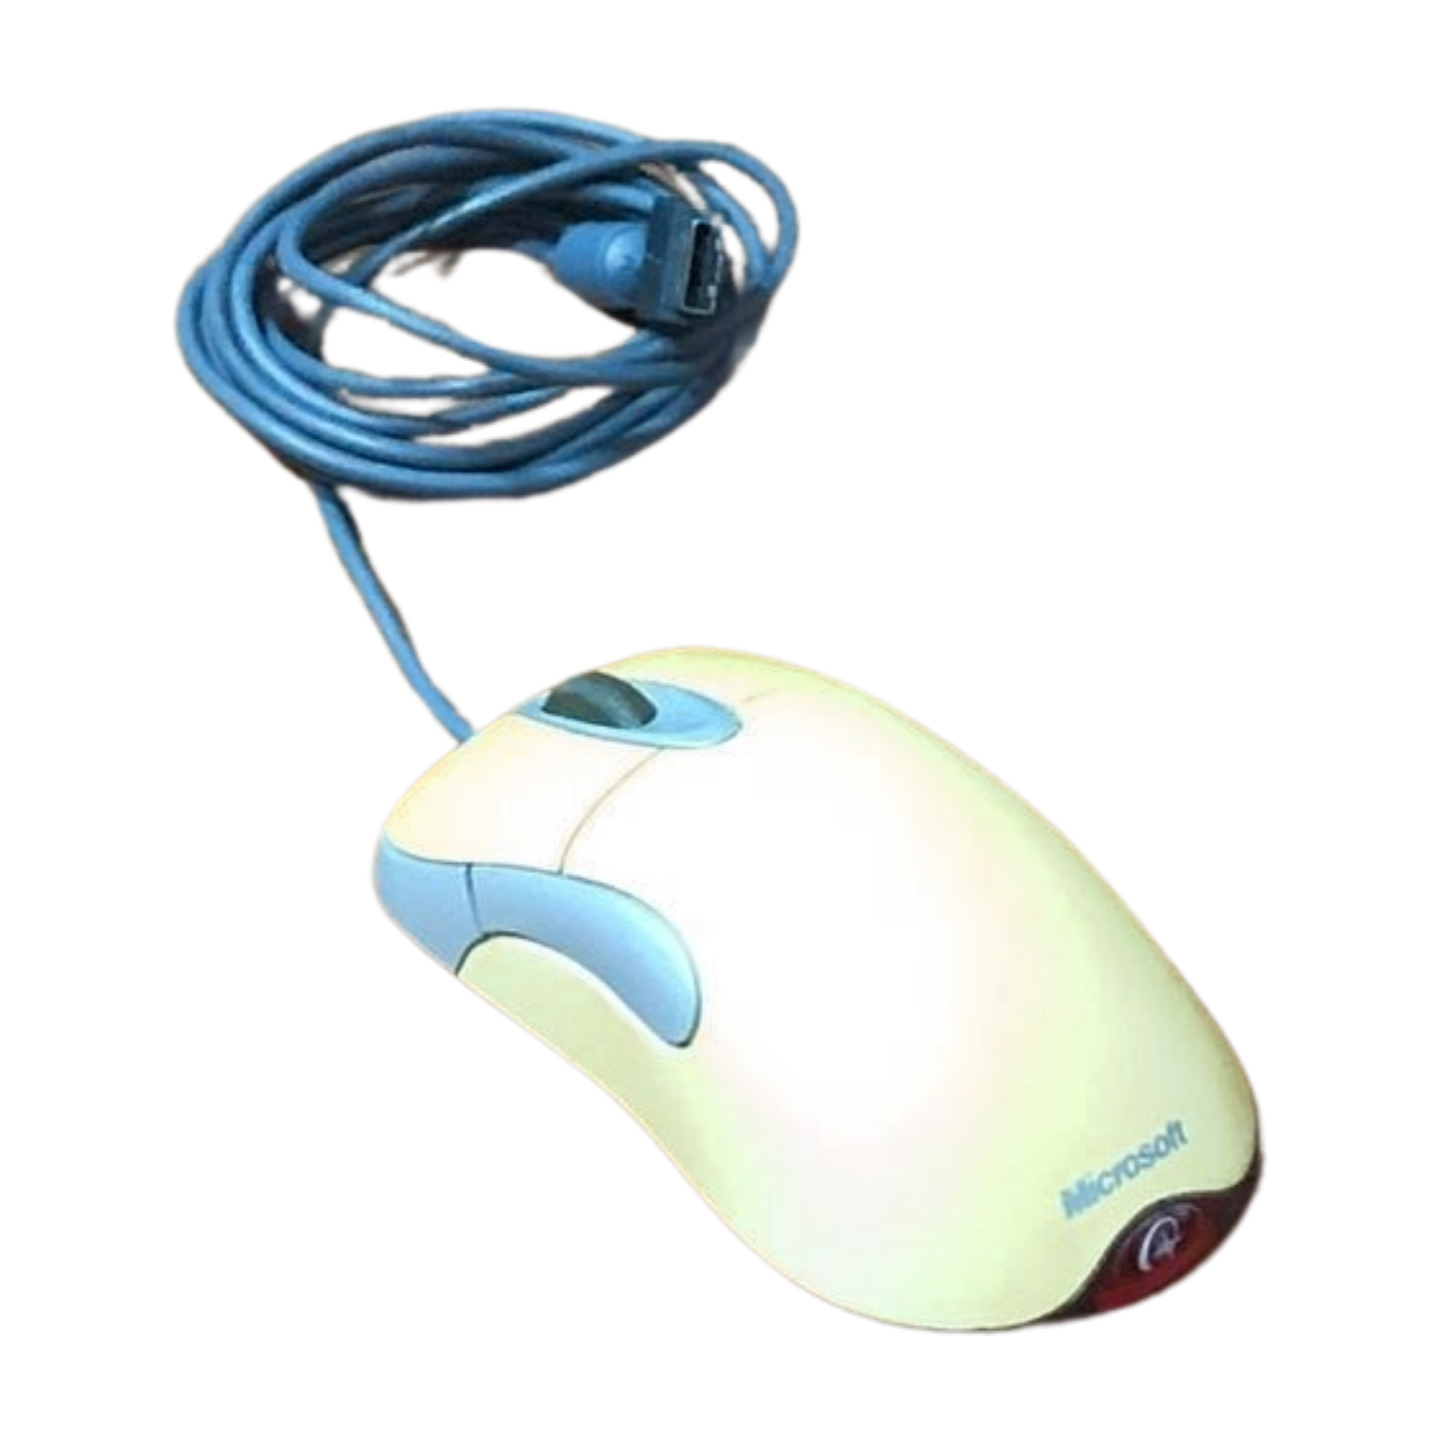 Microsoft Intellimouse Optical 1.1A USB & PS/2 Compatible Mouse (PN: X800472)